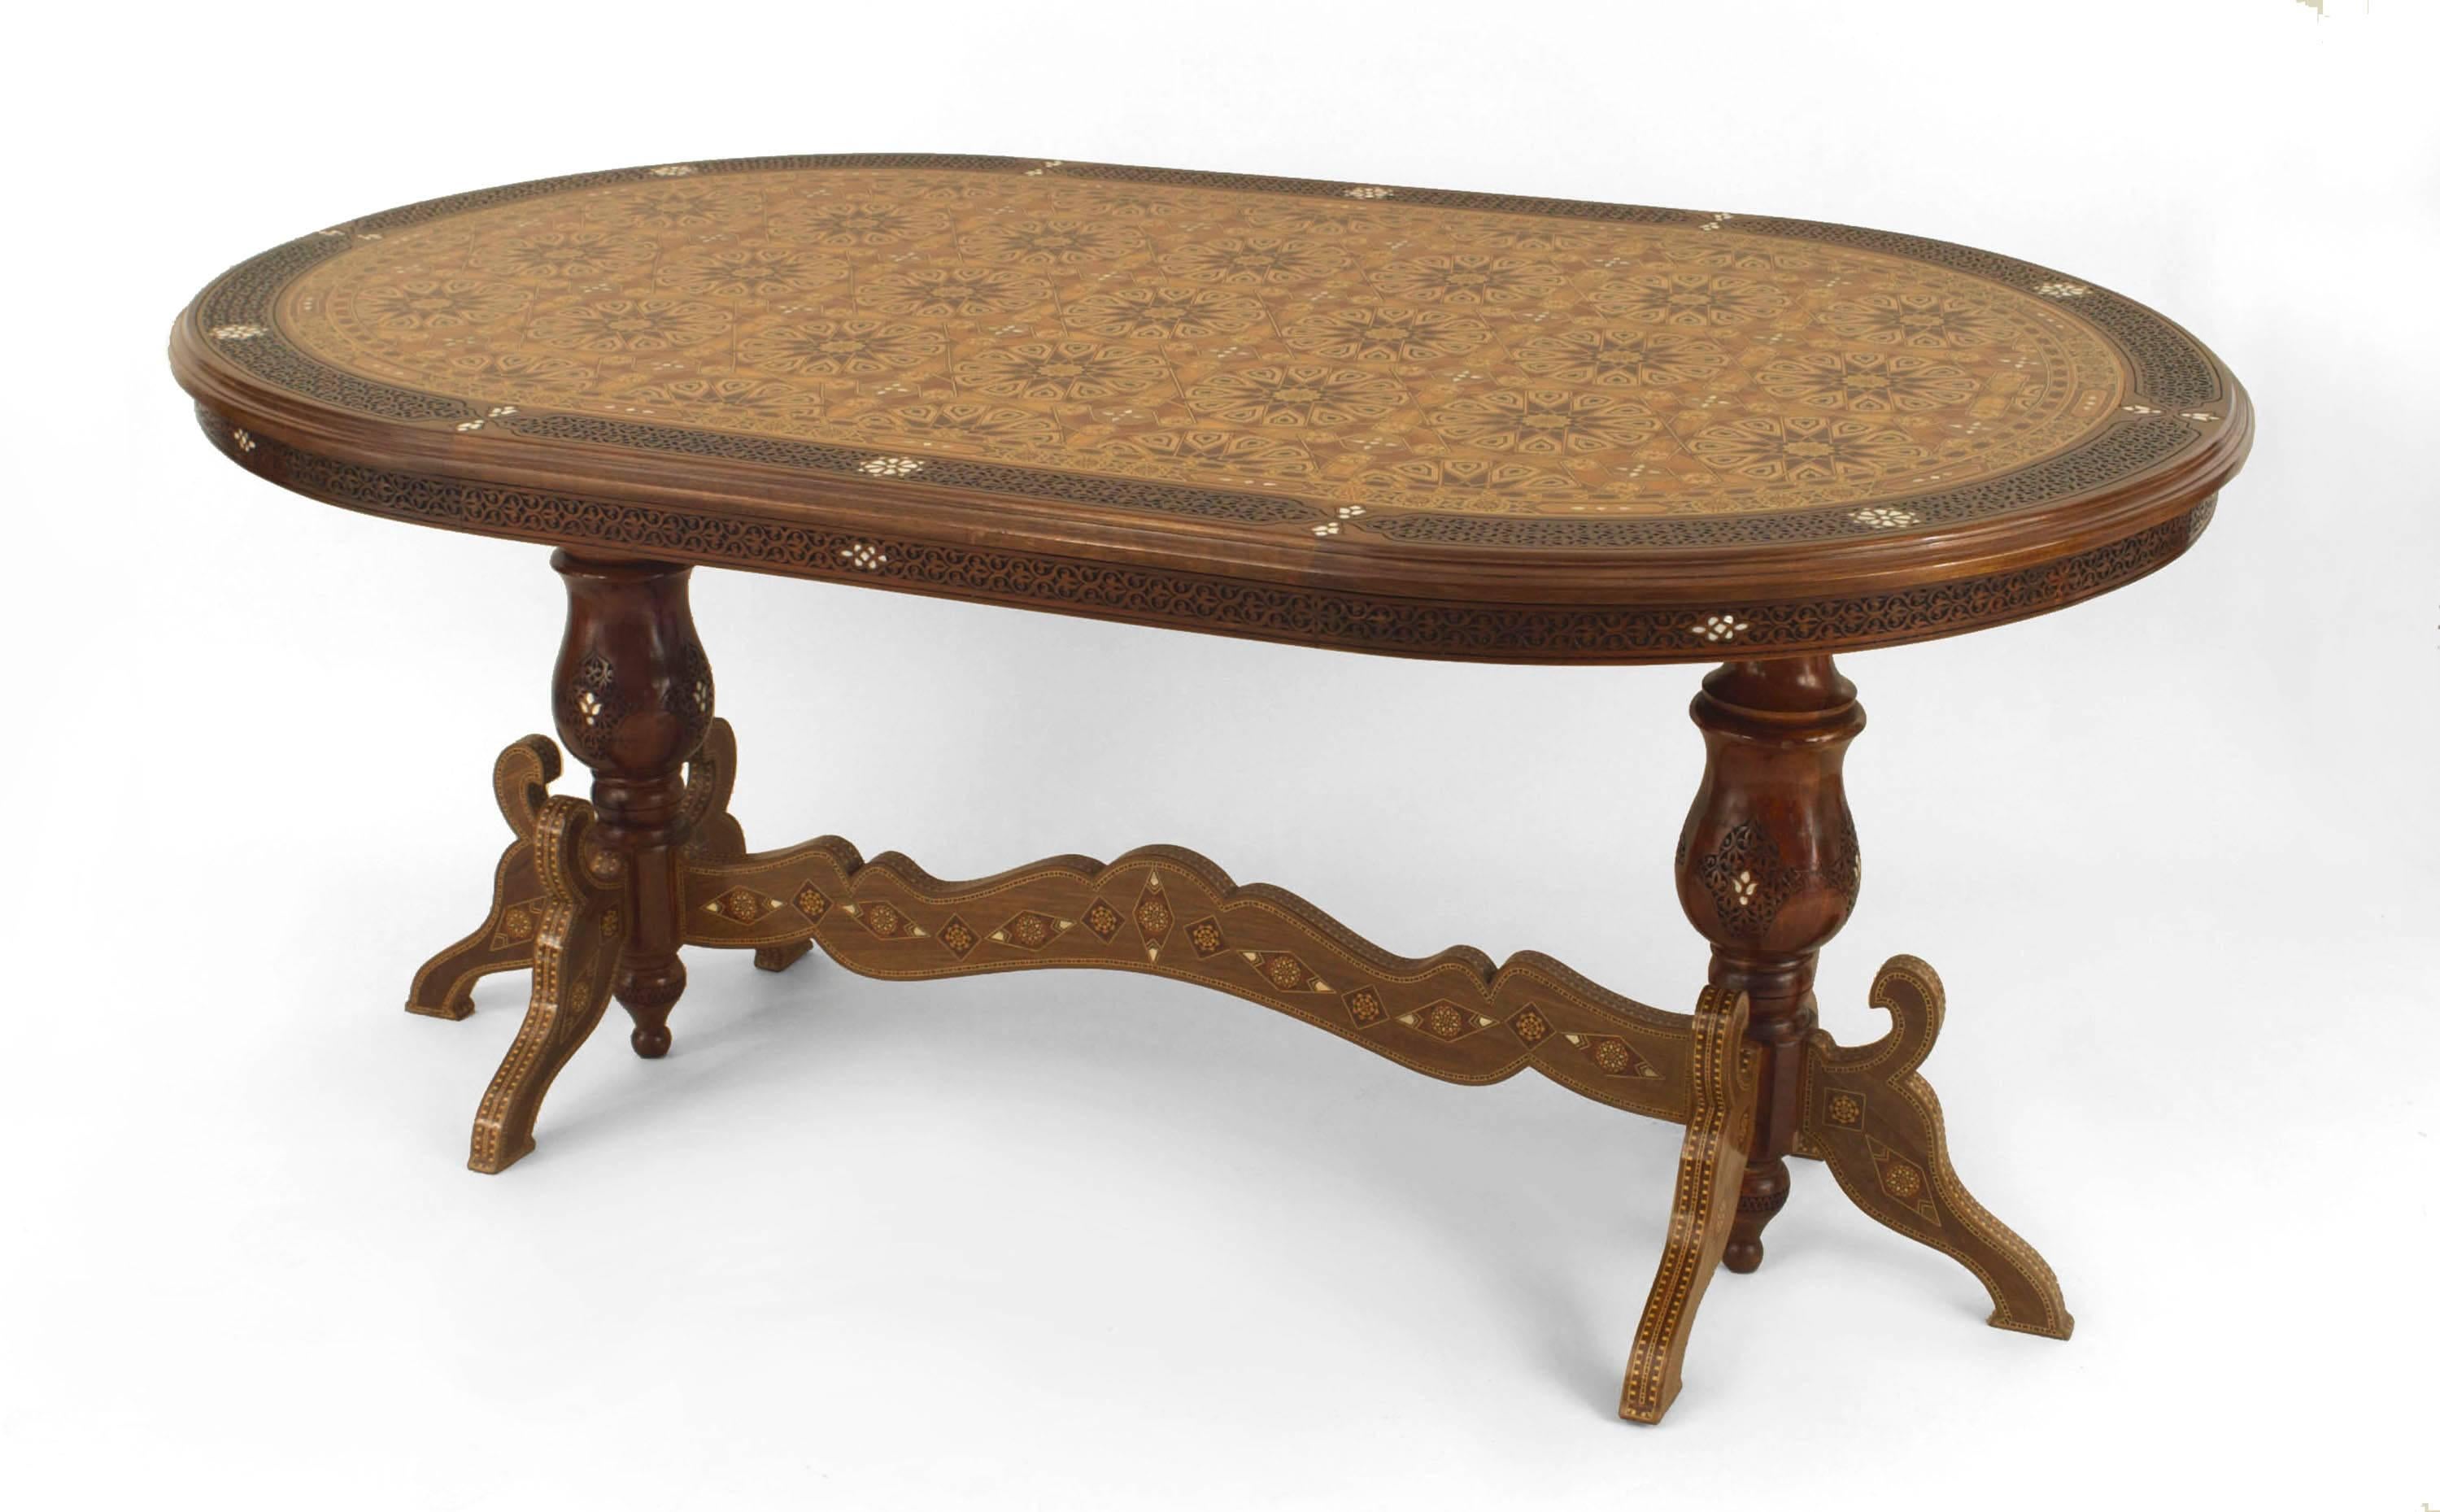 Middle Eastern Syrian (20th Century) oval dining table with a carved fretwork edge and an inlaid geometric design top with 2 pedestal sides connected with a stretcher (Related Items: CON061)
